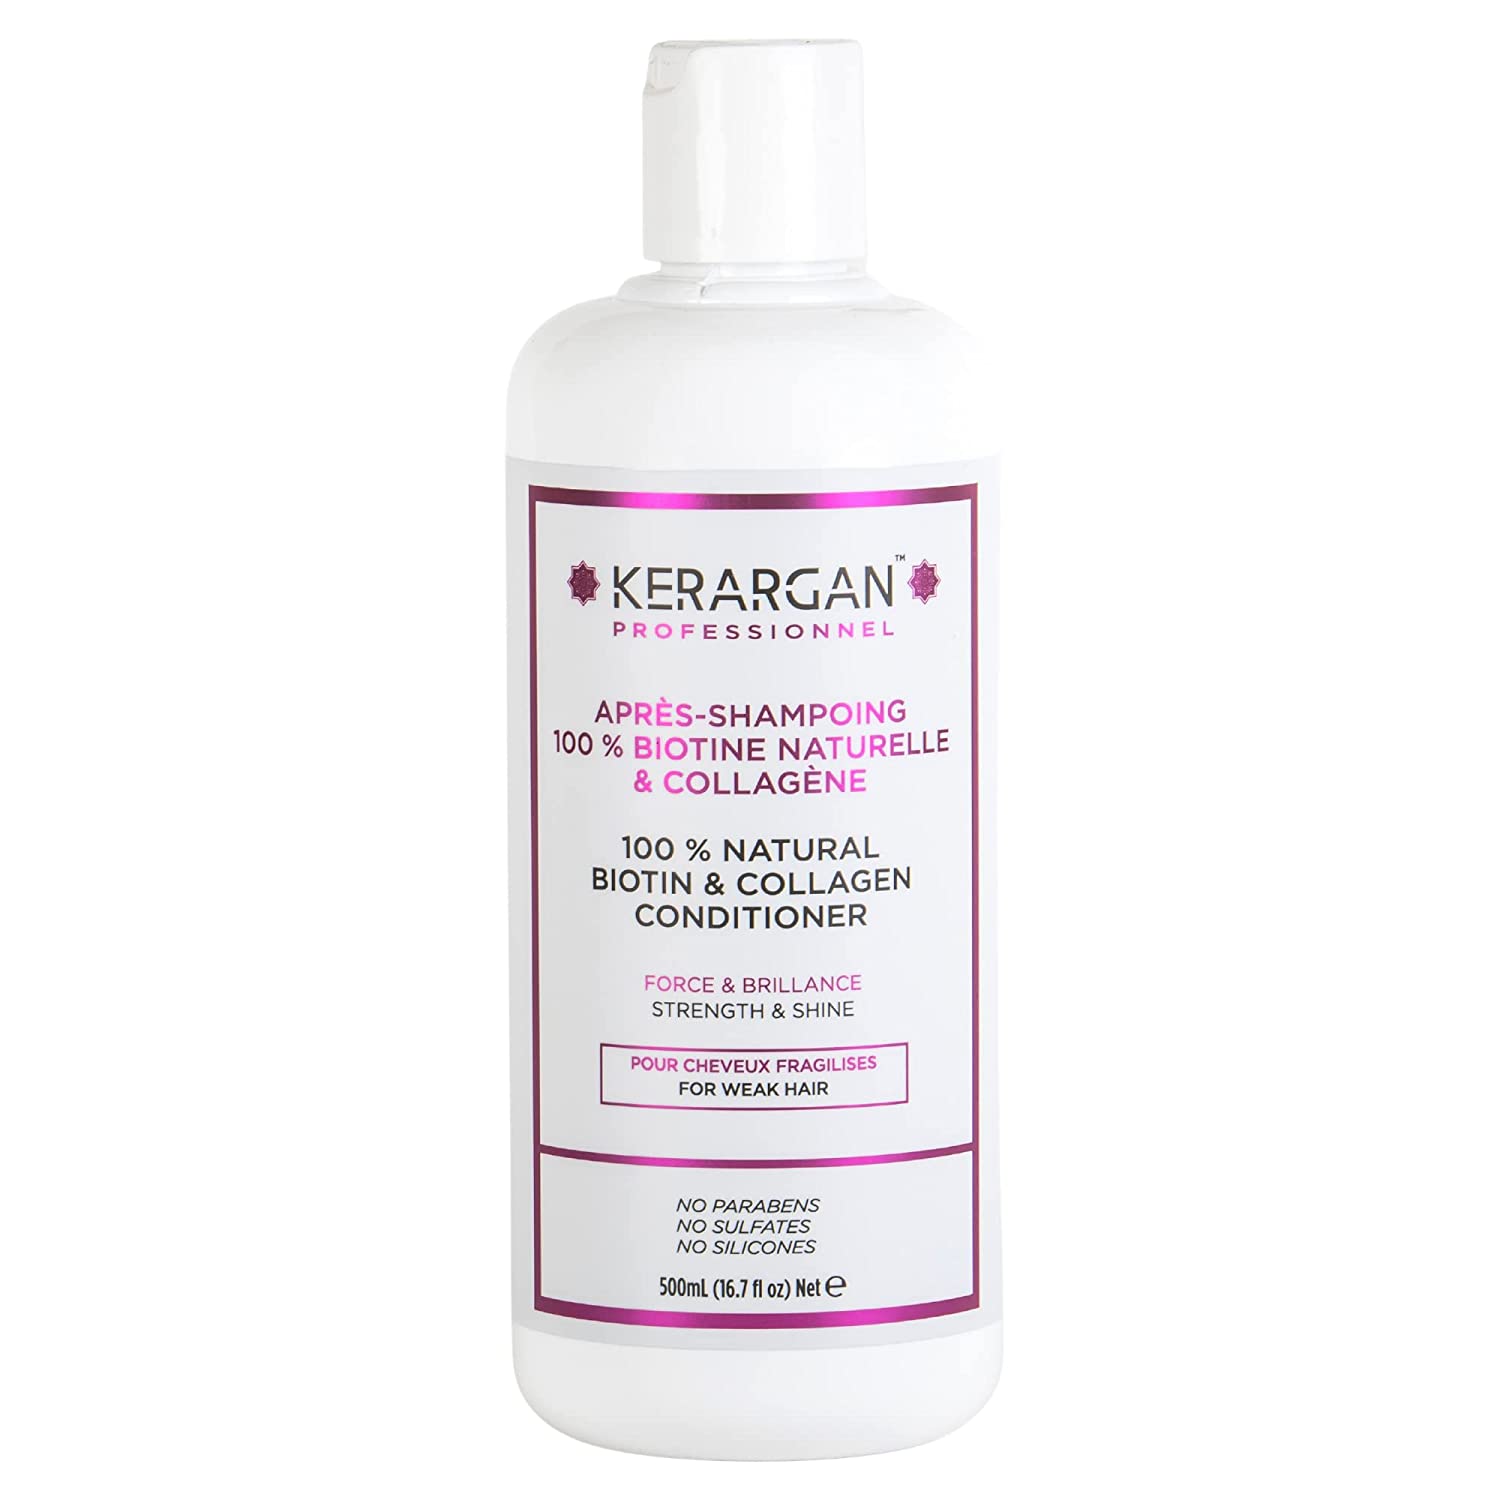 Kerargan - Conditioner with biotin and collagen to give your hair new strength and shine while making it thicker at the same time - For damaged hair - Sulphate, Paraben and Silicone Free - 500ml, ‎white